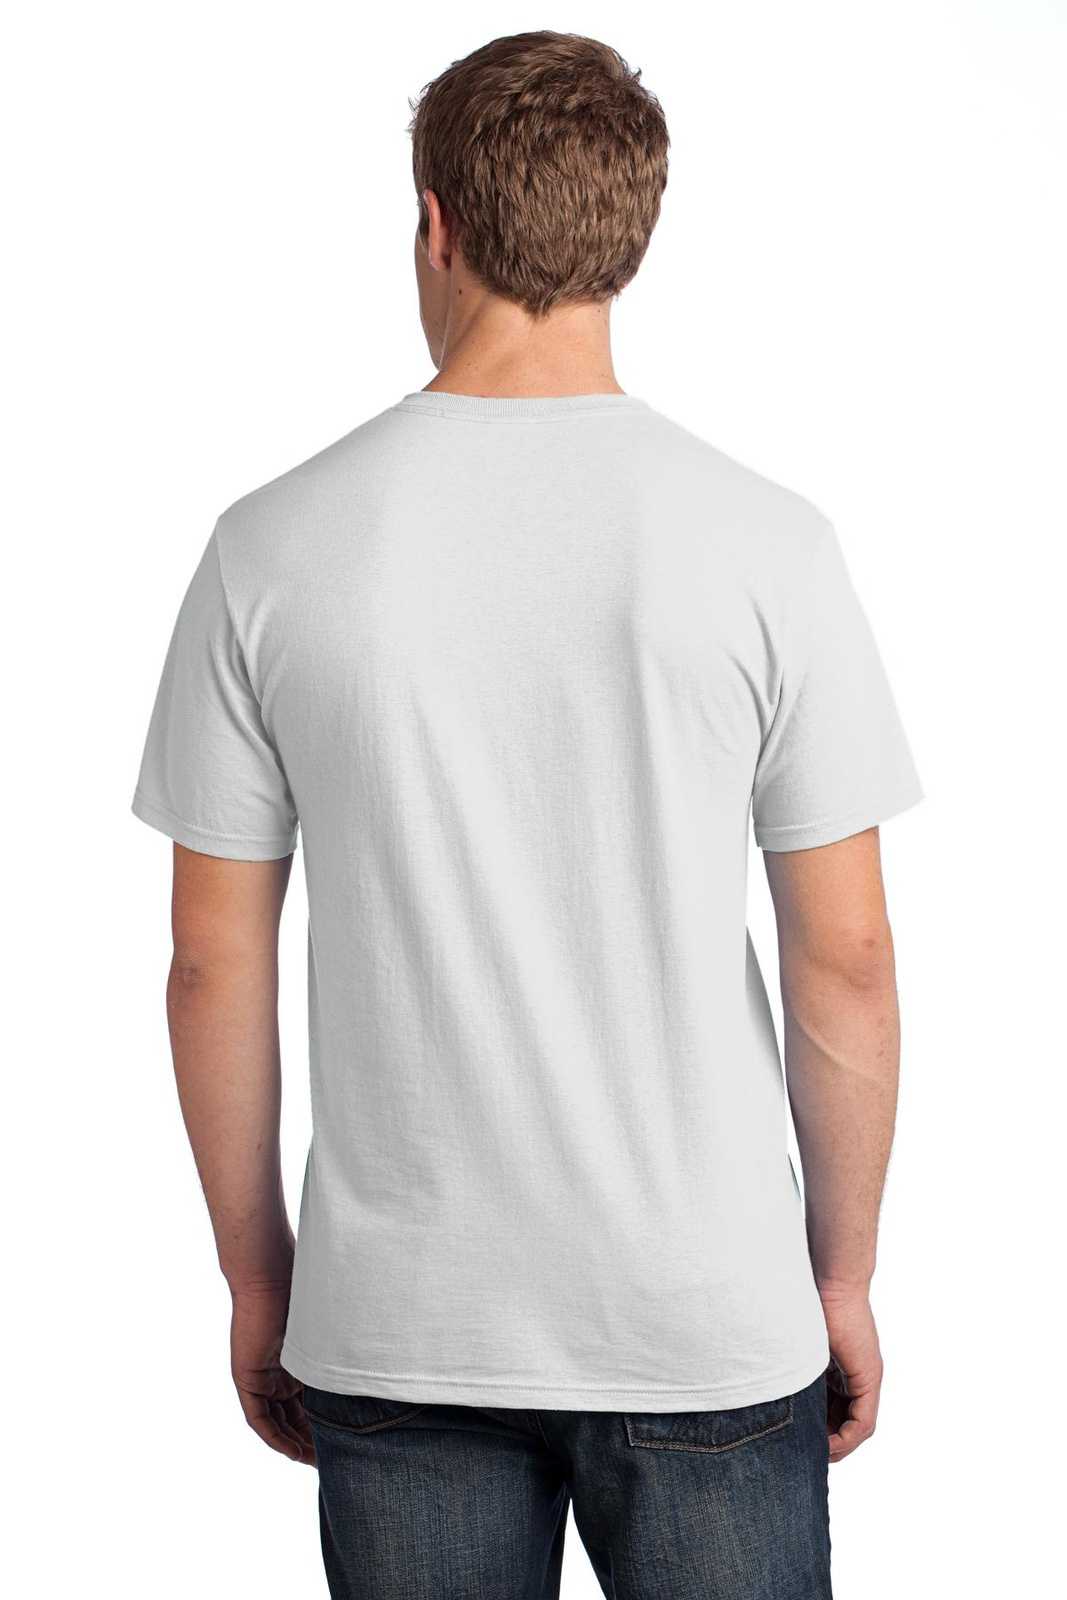 Fruit of the Loom 3930 HD Cotton 100% Cotton T-Shirt - White - HIT a Double